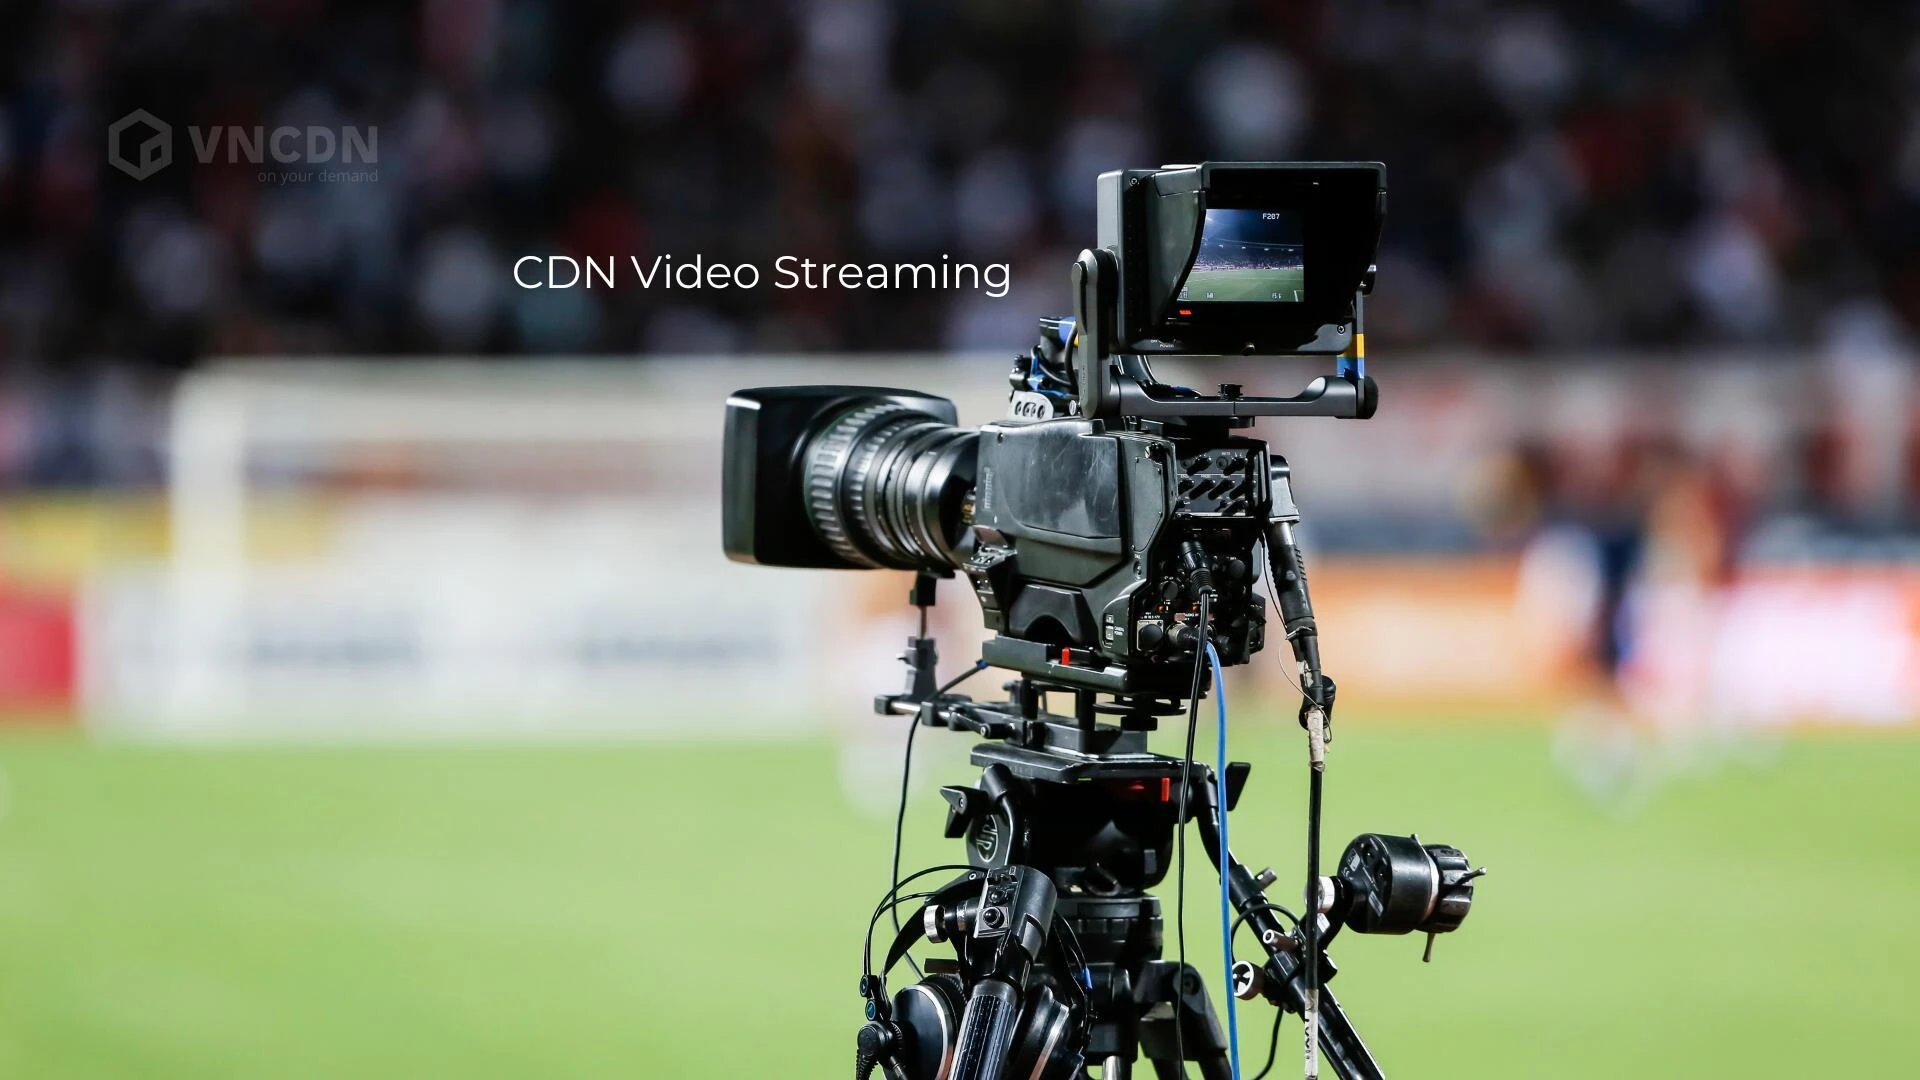 Compare today's top Video Streaming CDN providers